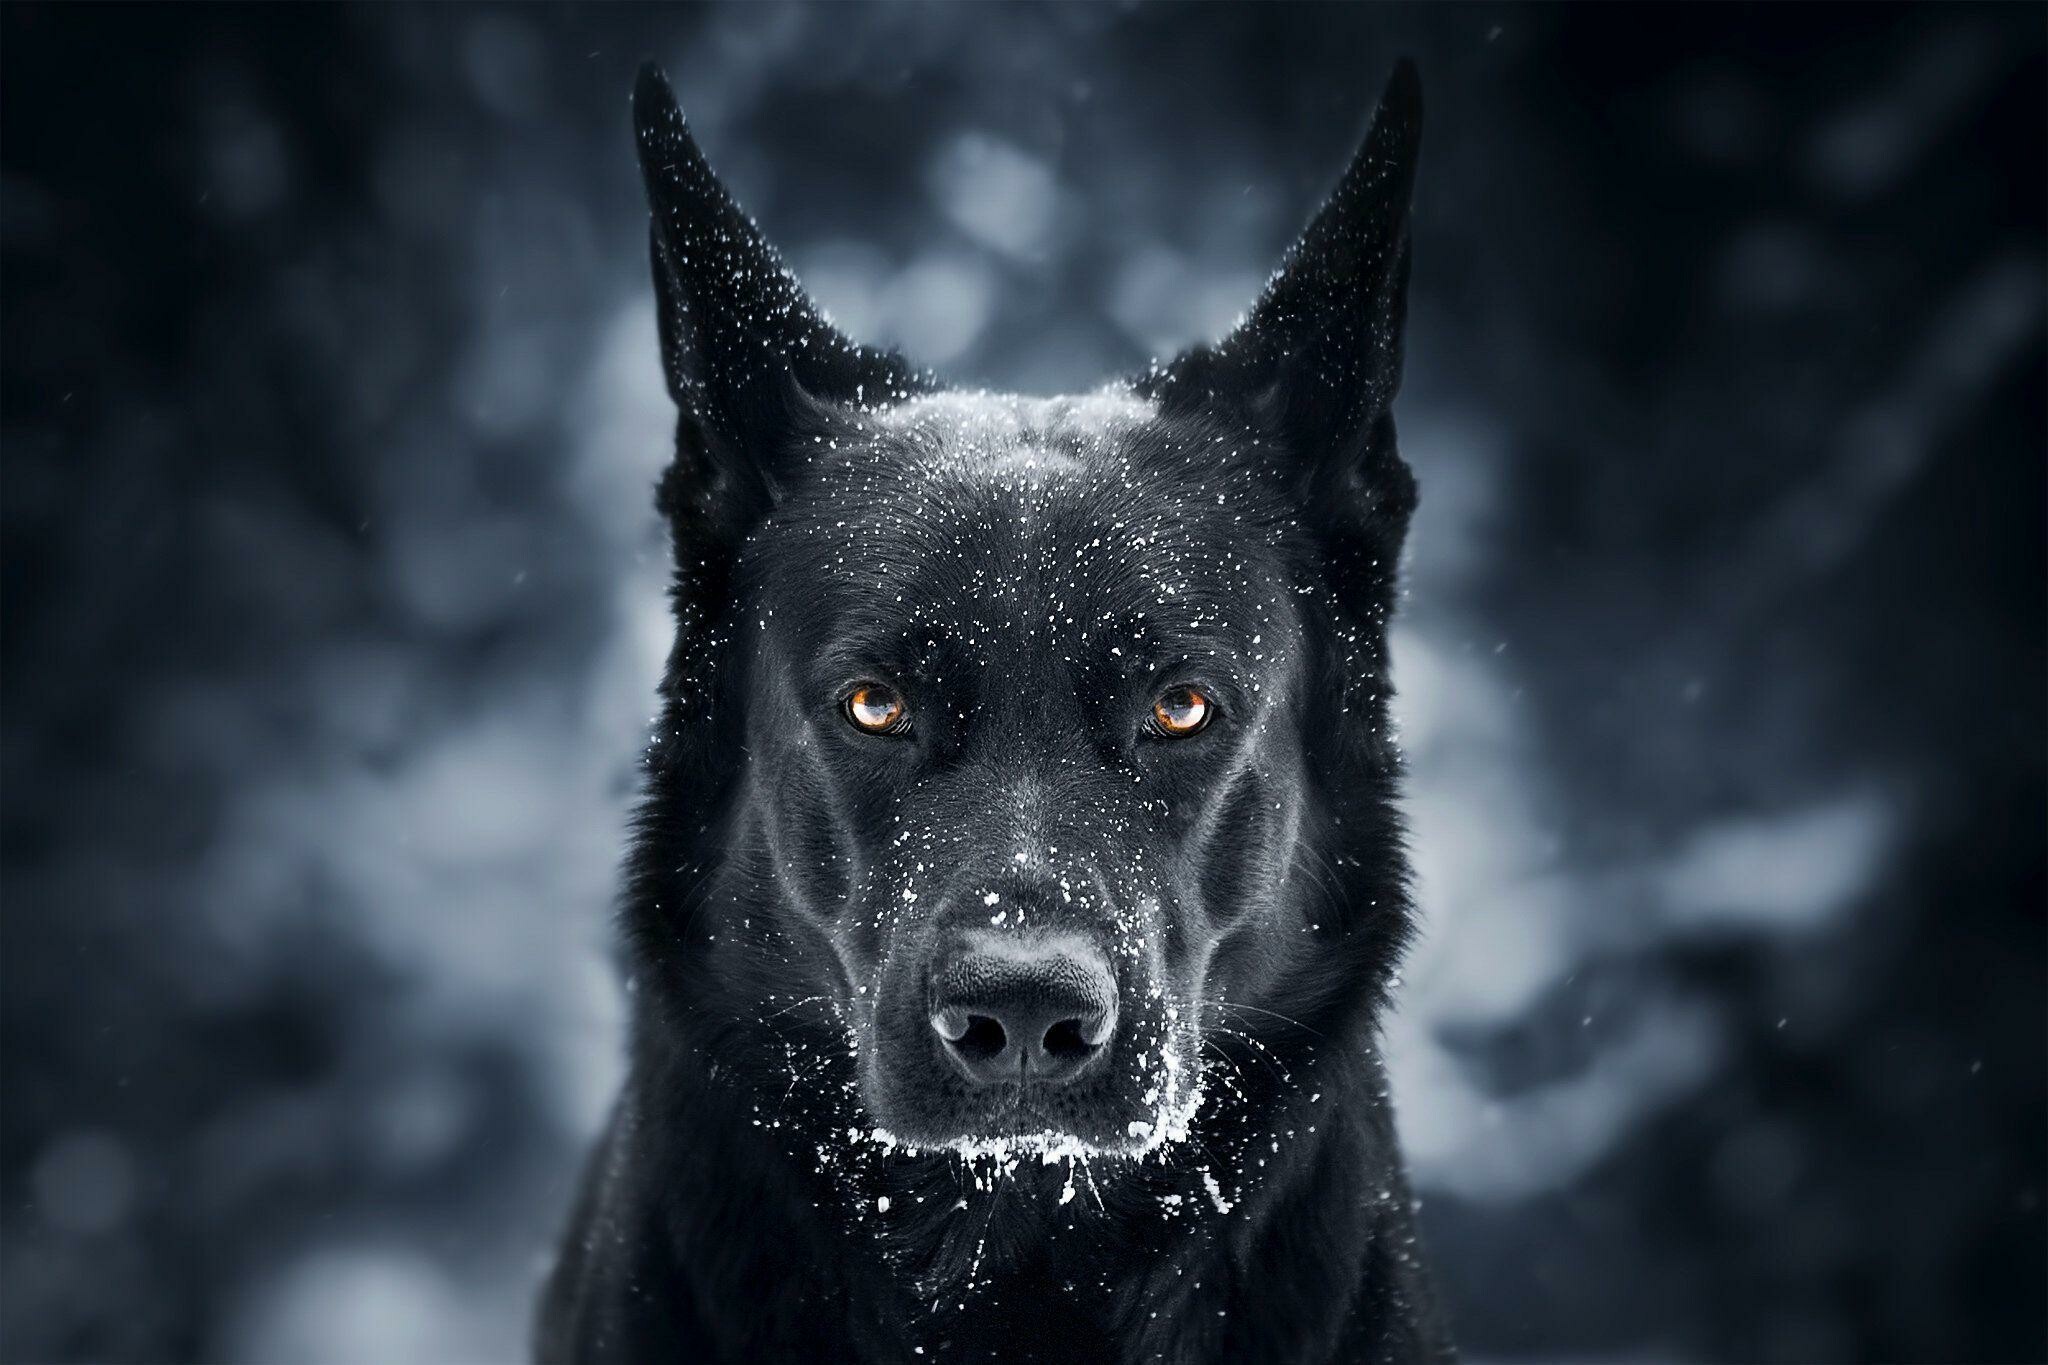 German Shepherd: A popular selection for use as working dogs, Dog breed. 2050x1370 HD Wallpaper.